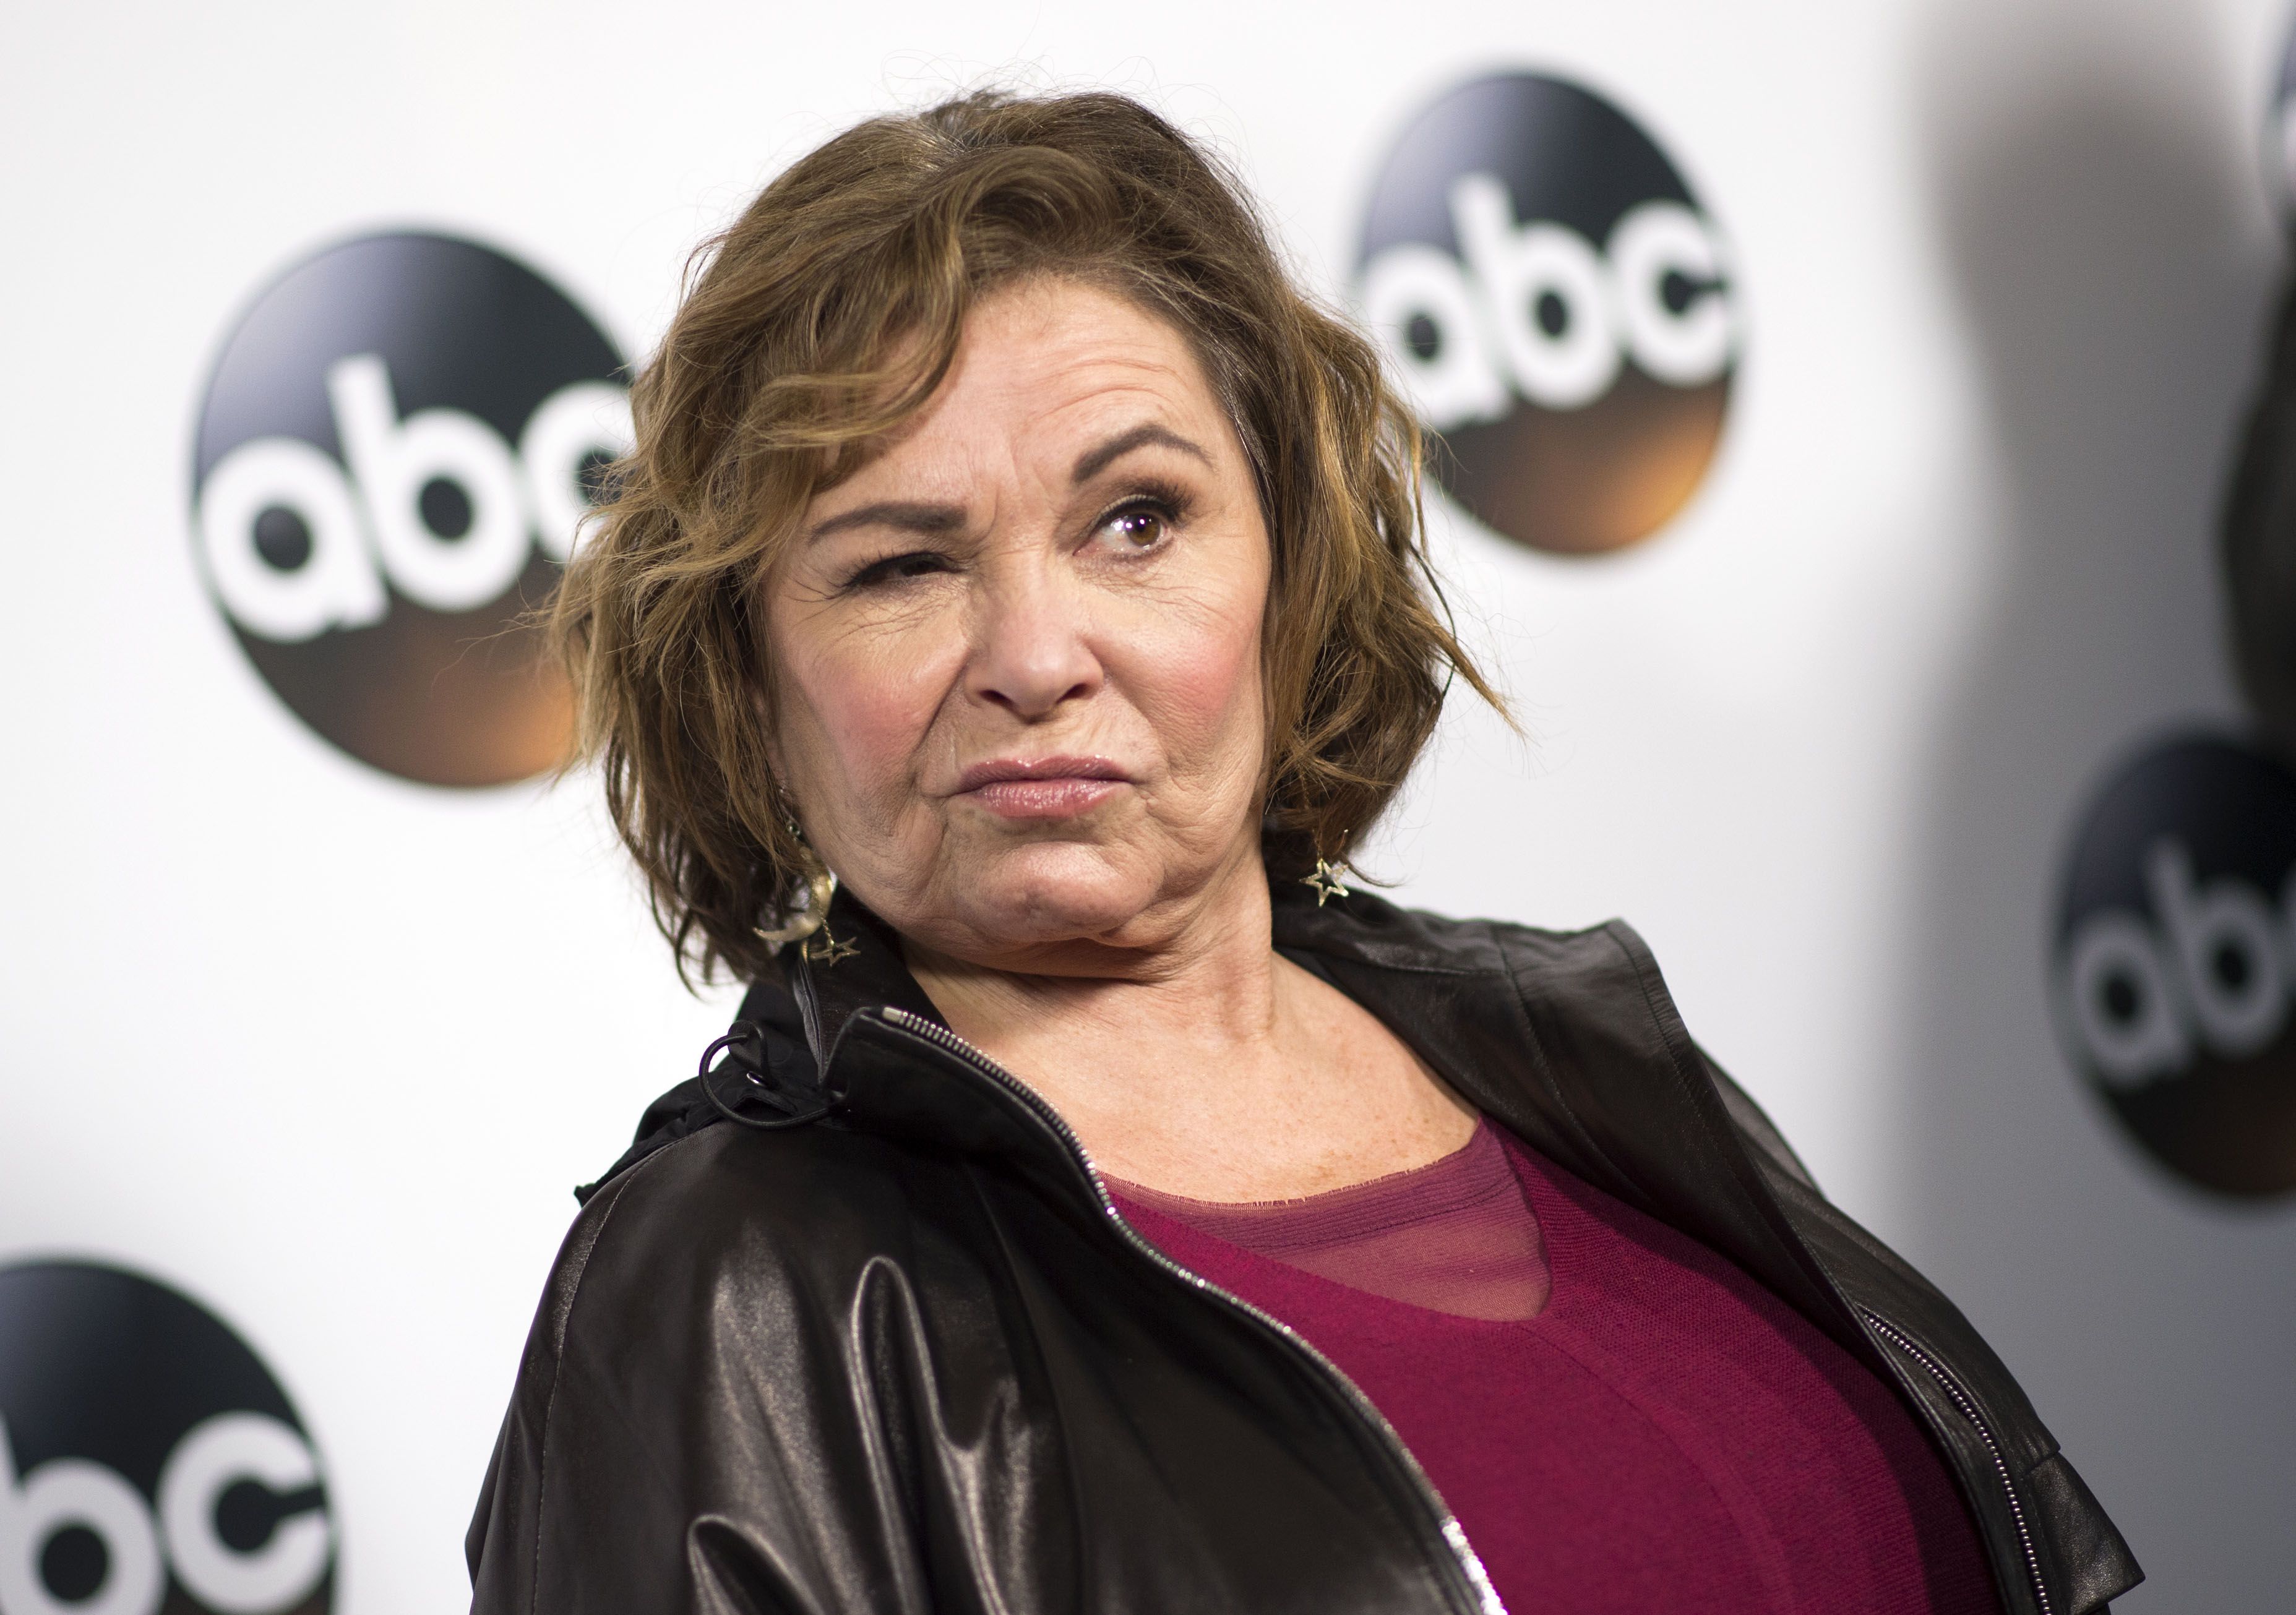 Roseanne Barr Speaks Out After 'The Conners' Premiere